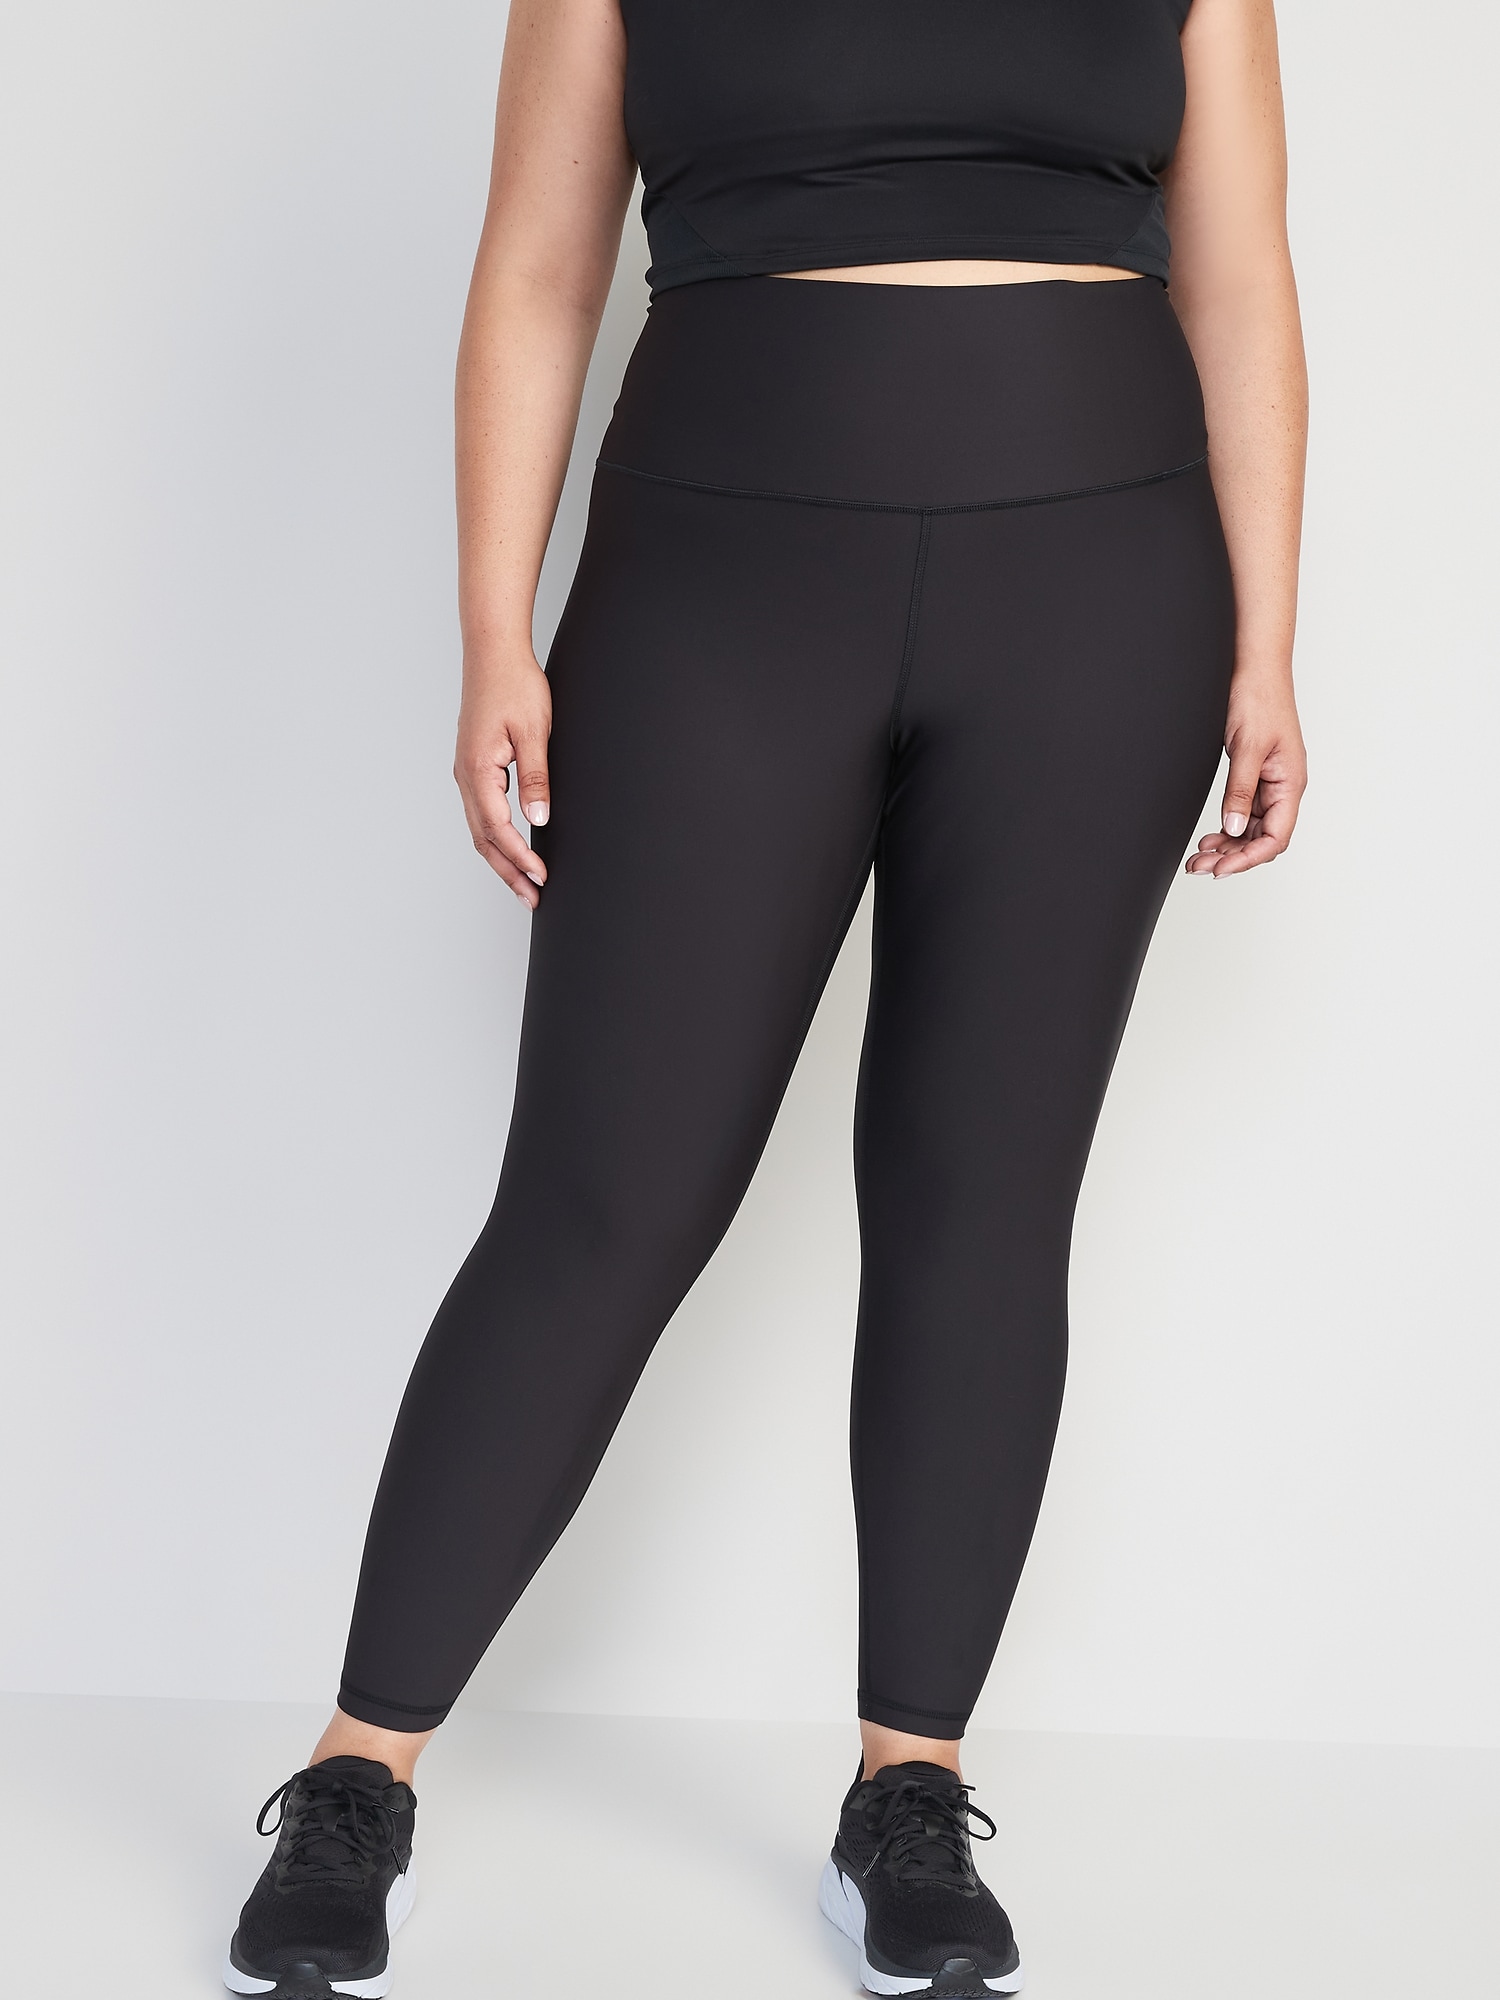 Extra High-Waisted PowerSoft 7/8 Leggings | Old Navy